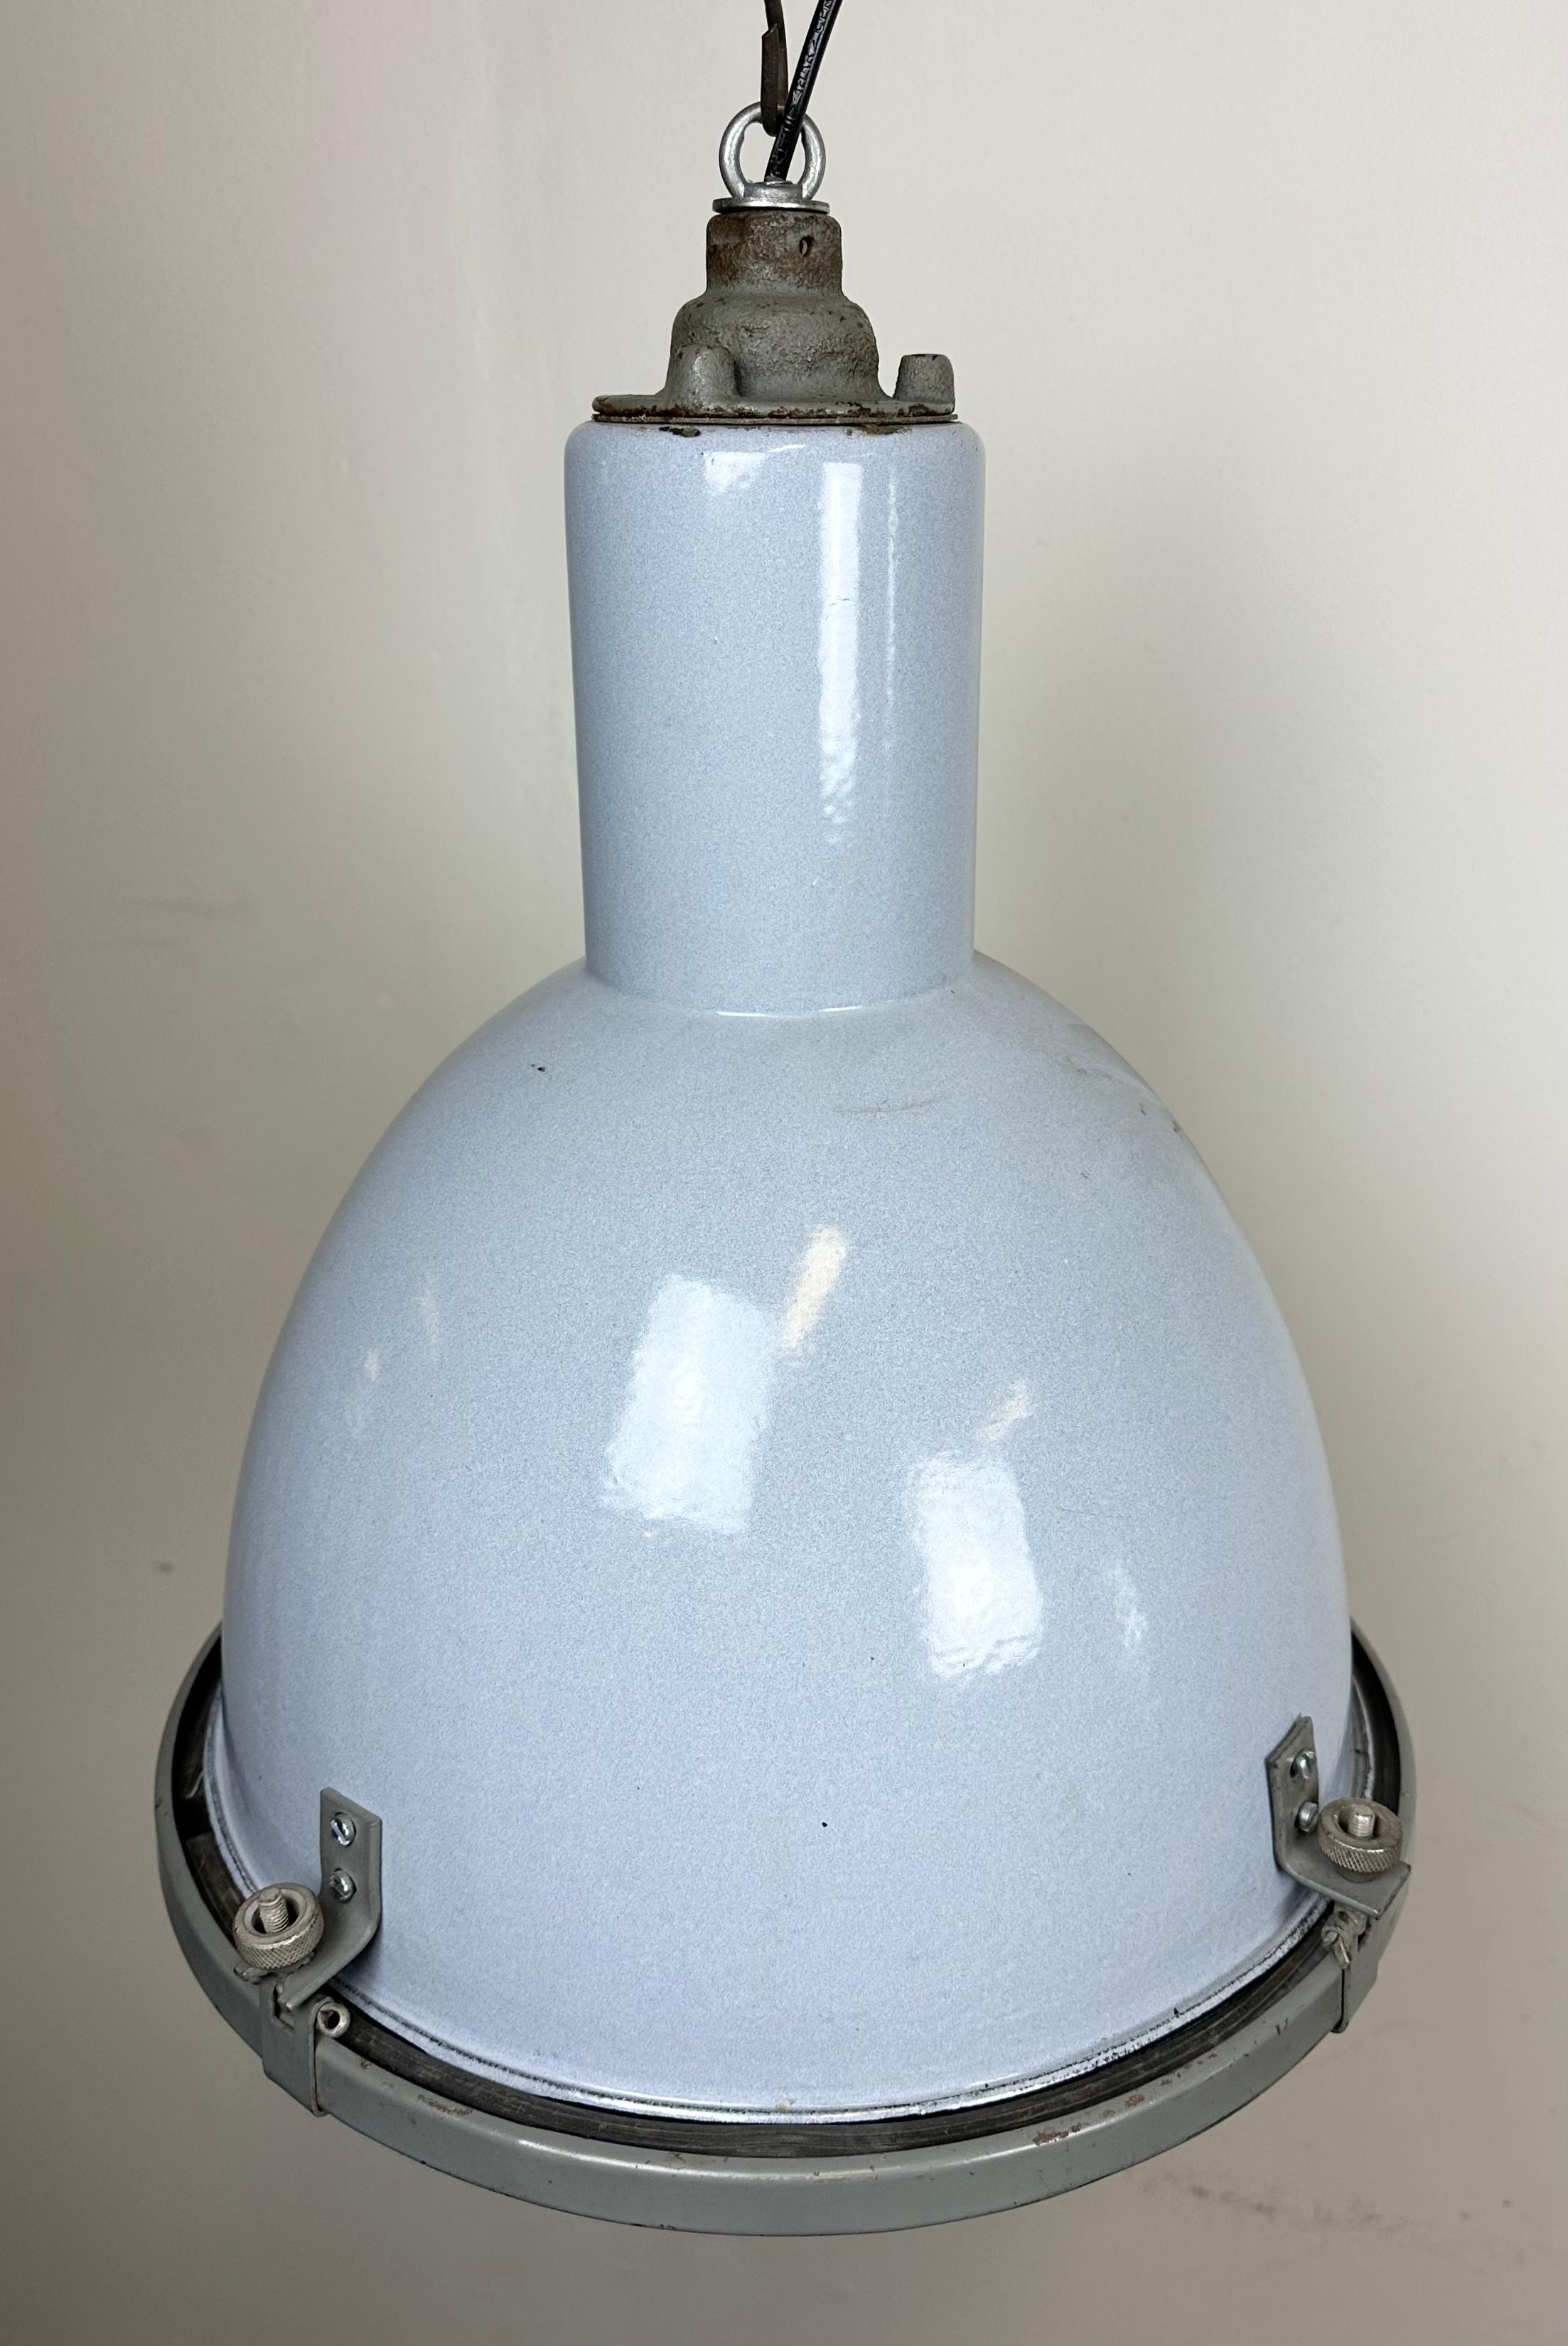 Bauhaus Grey Enamel Industrial Pendant Lamp with Glass Cover, 1950s For Sale 4